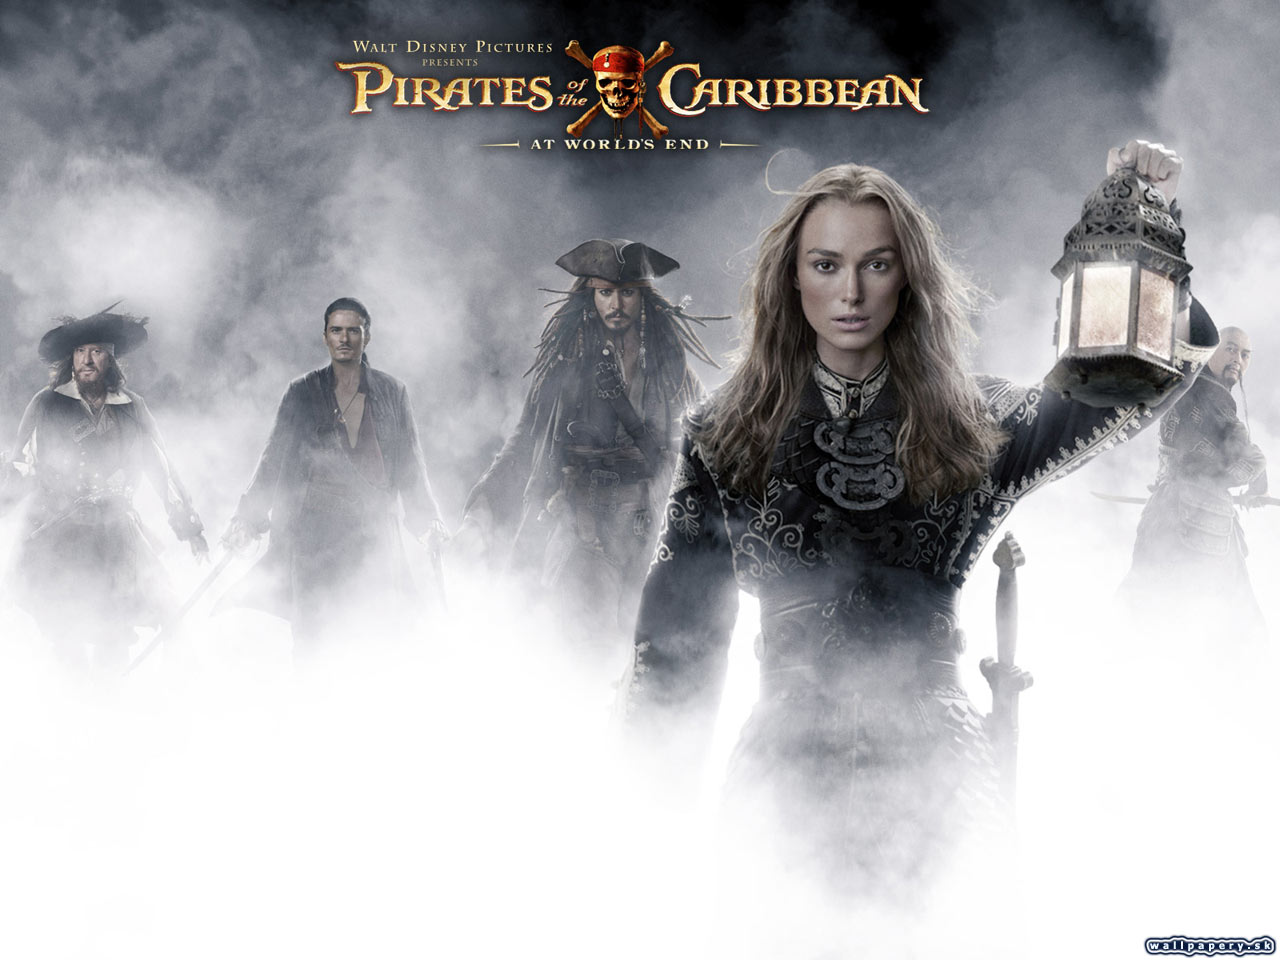 Pirates of the Caribbean: At World's End - wallpaper 3